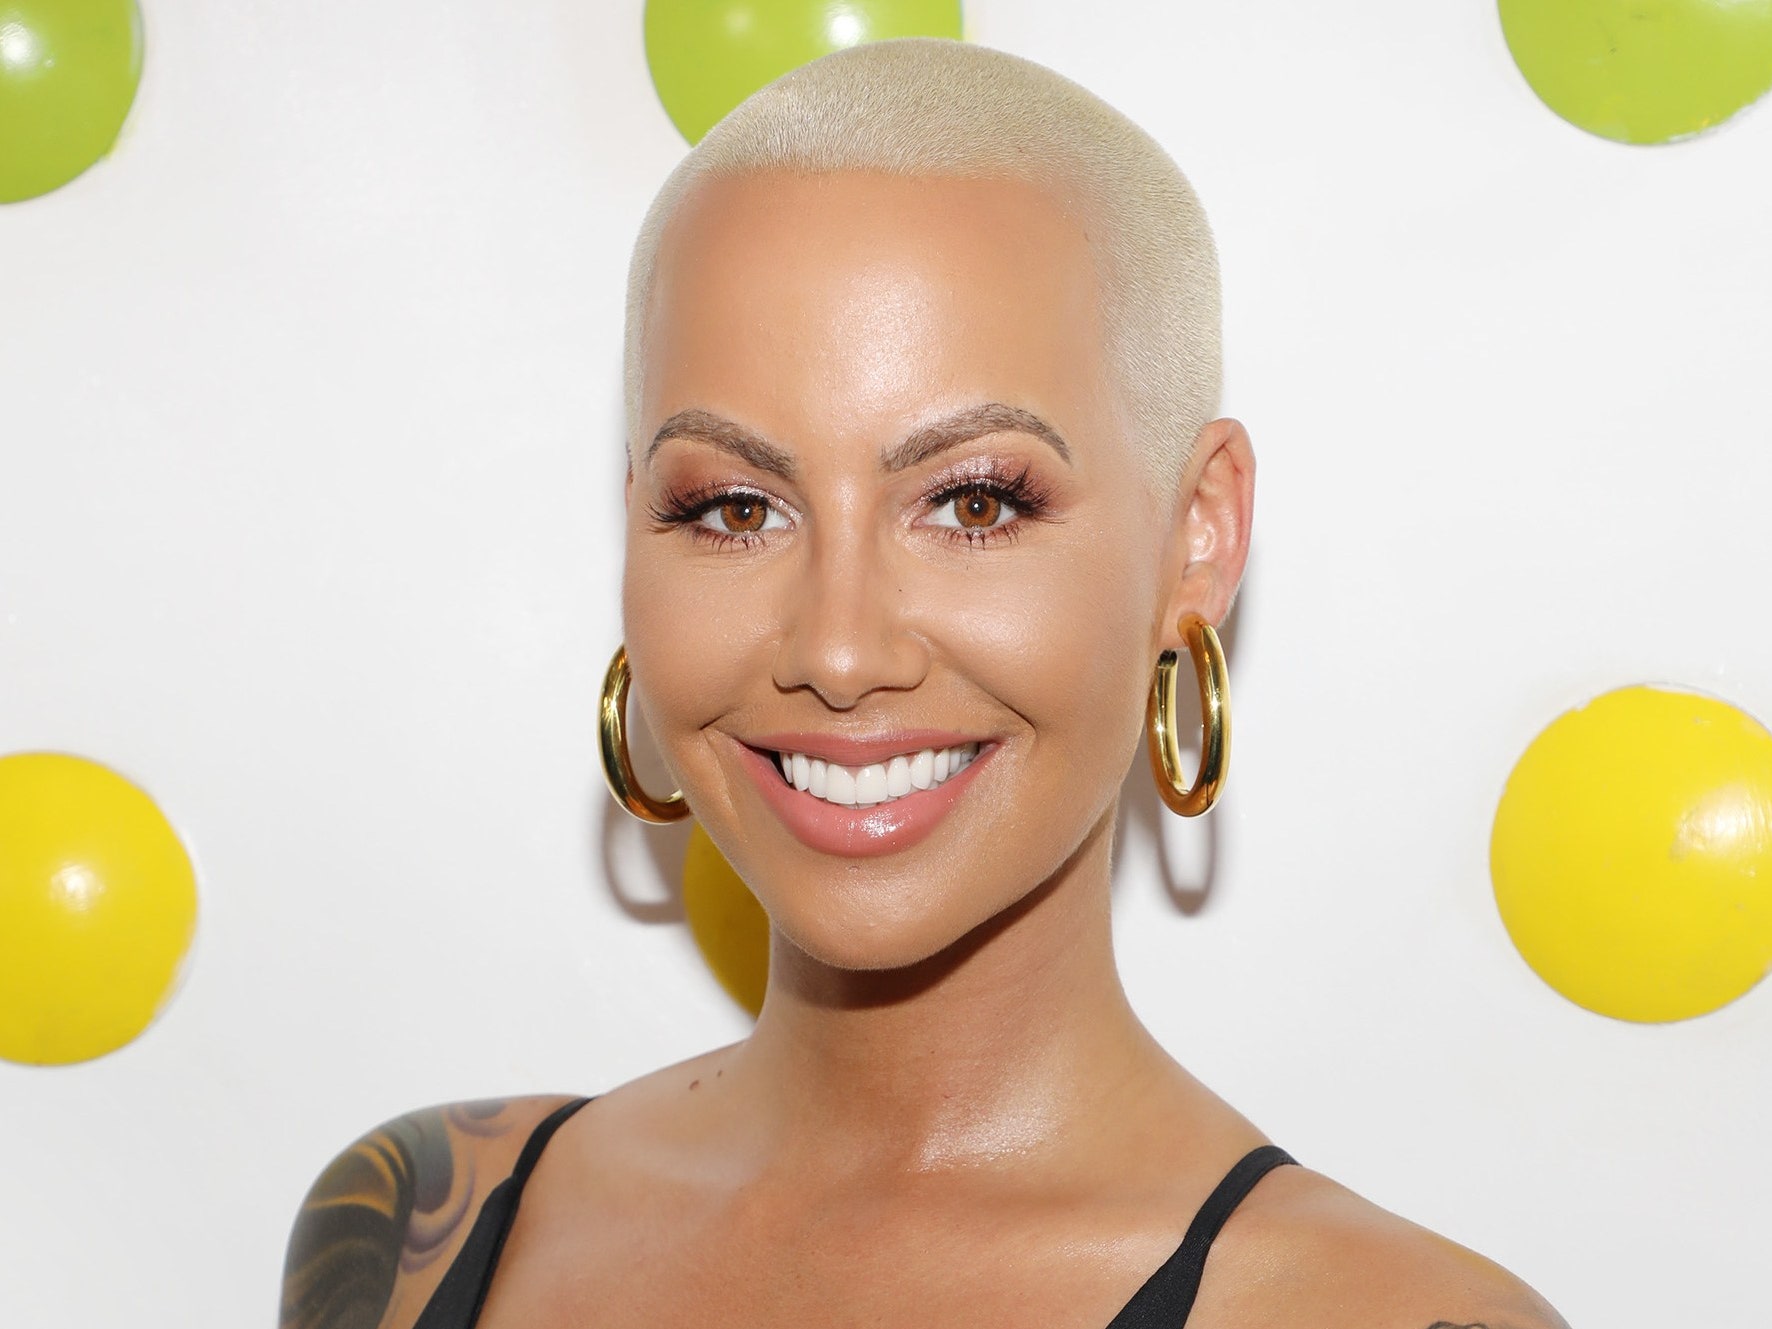 charles riggs recommends sex video amber rose pic